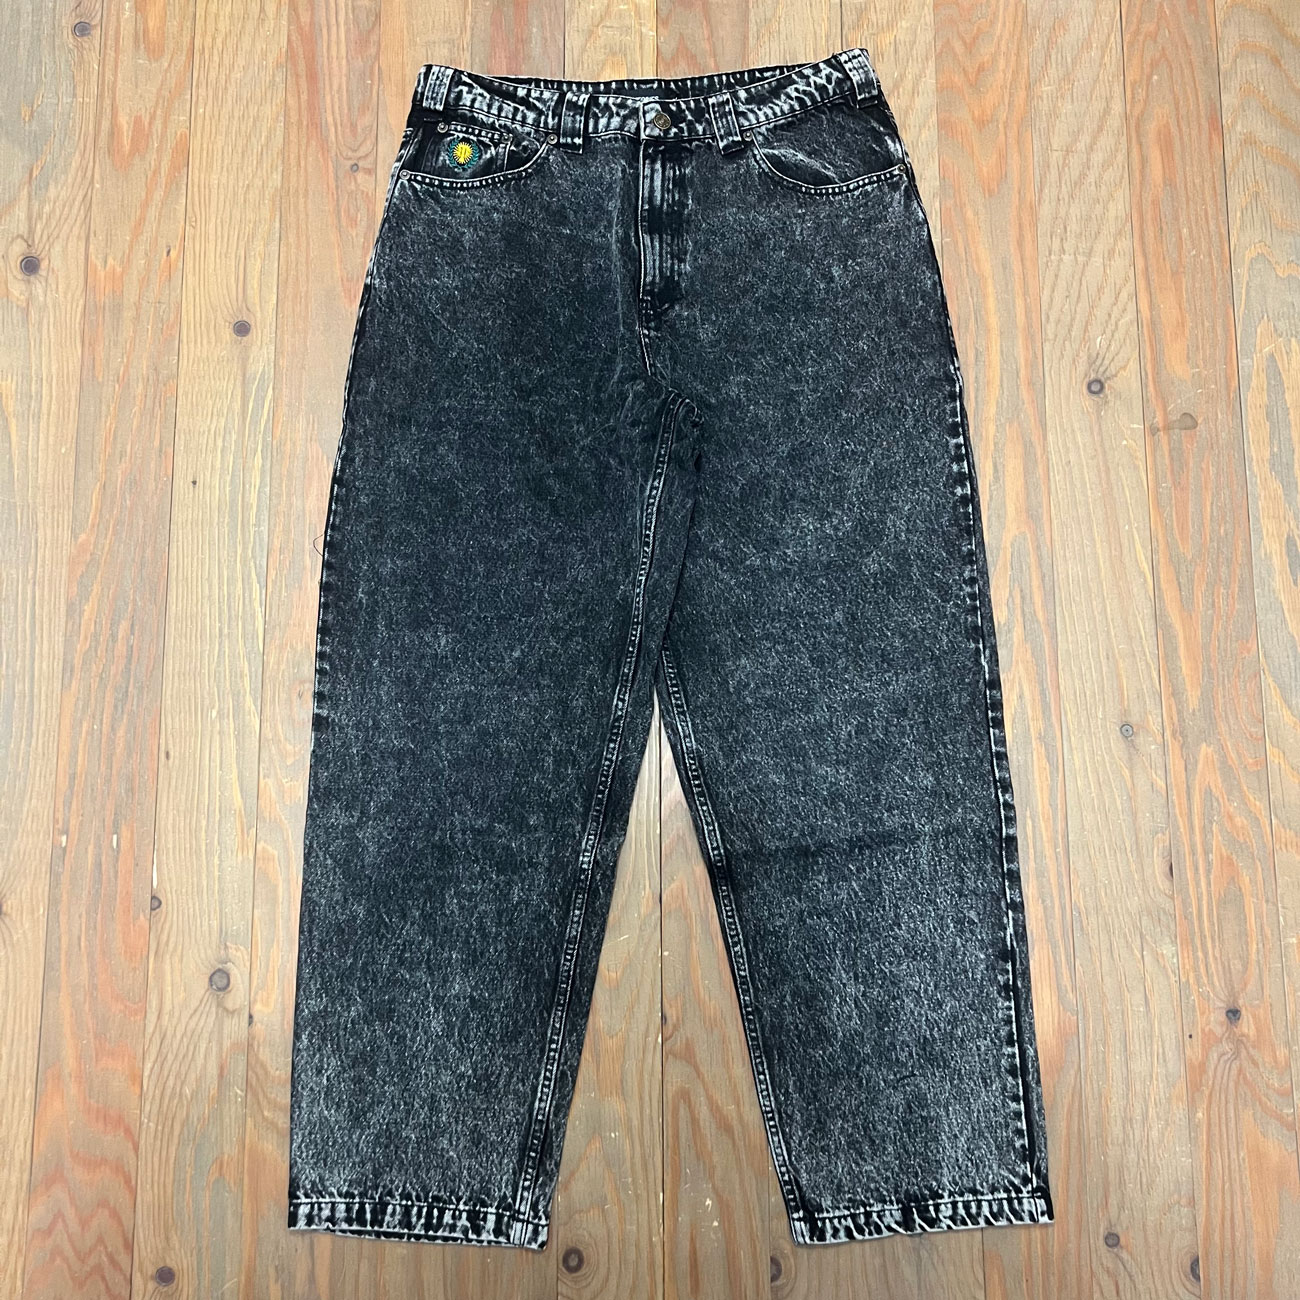 THEORIES PLAZA JEANS